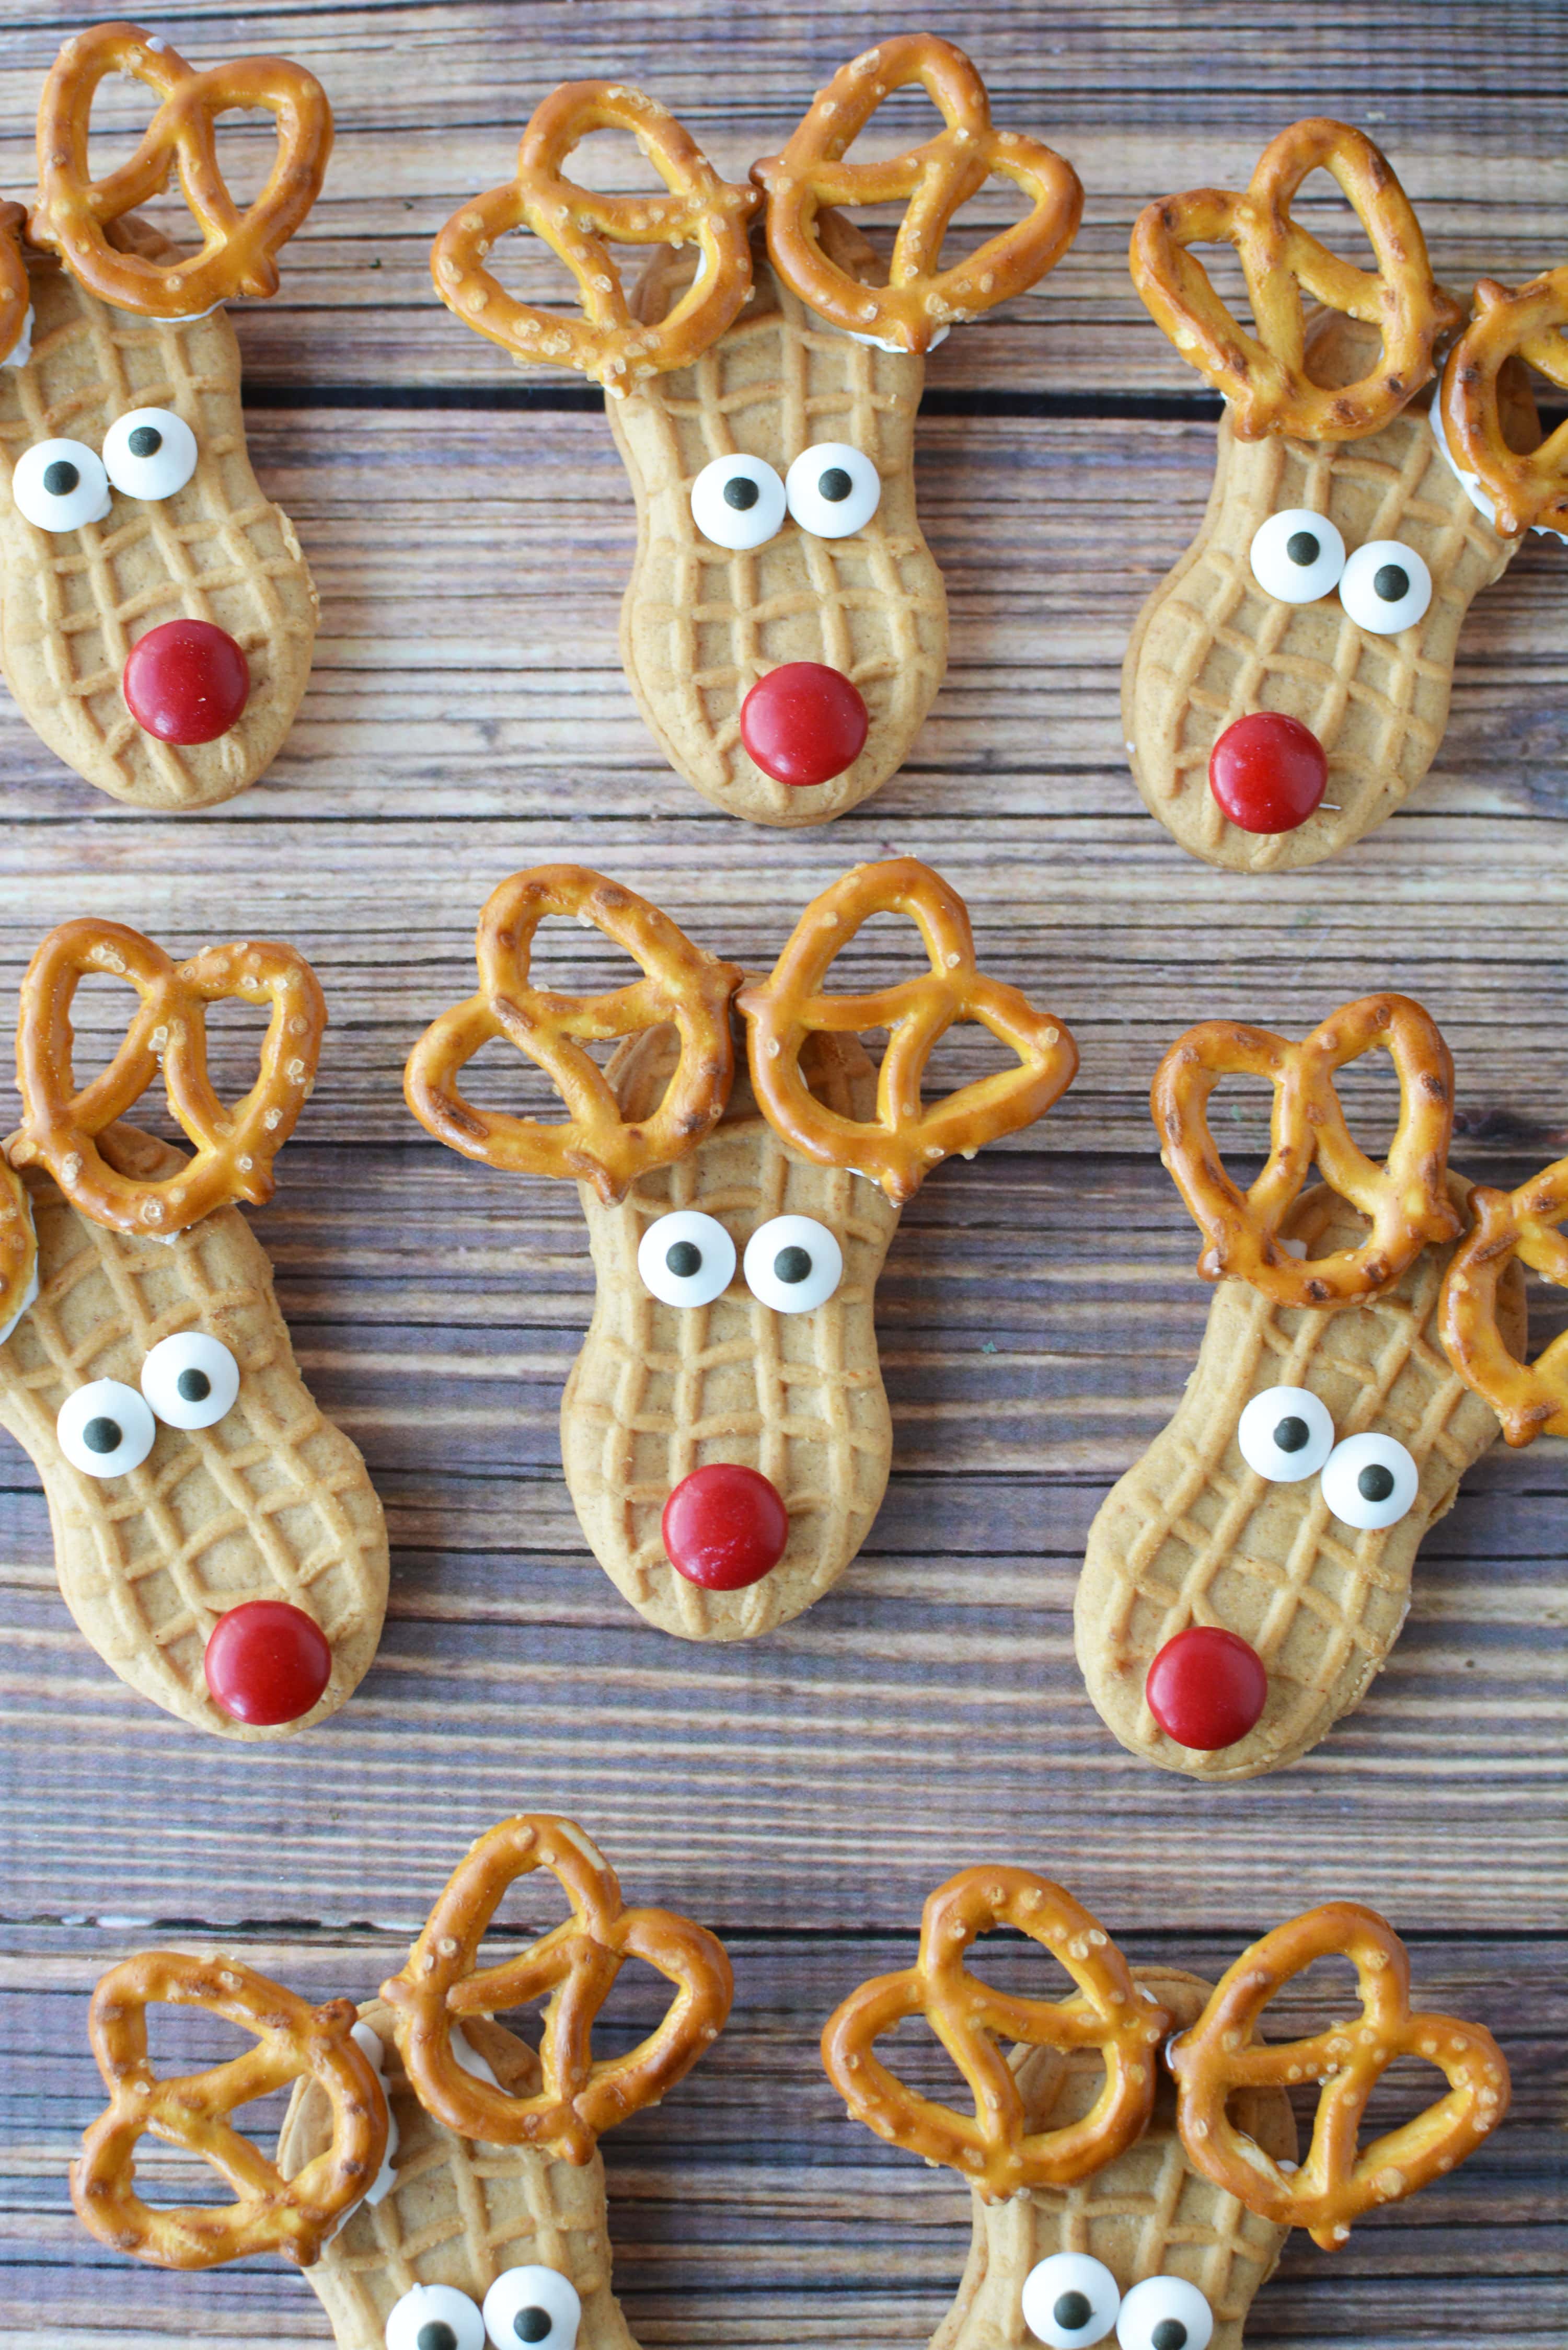 No Bake Nutter Butter Reindeer Cookies - So CUTE! - Thrifty NW Mom